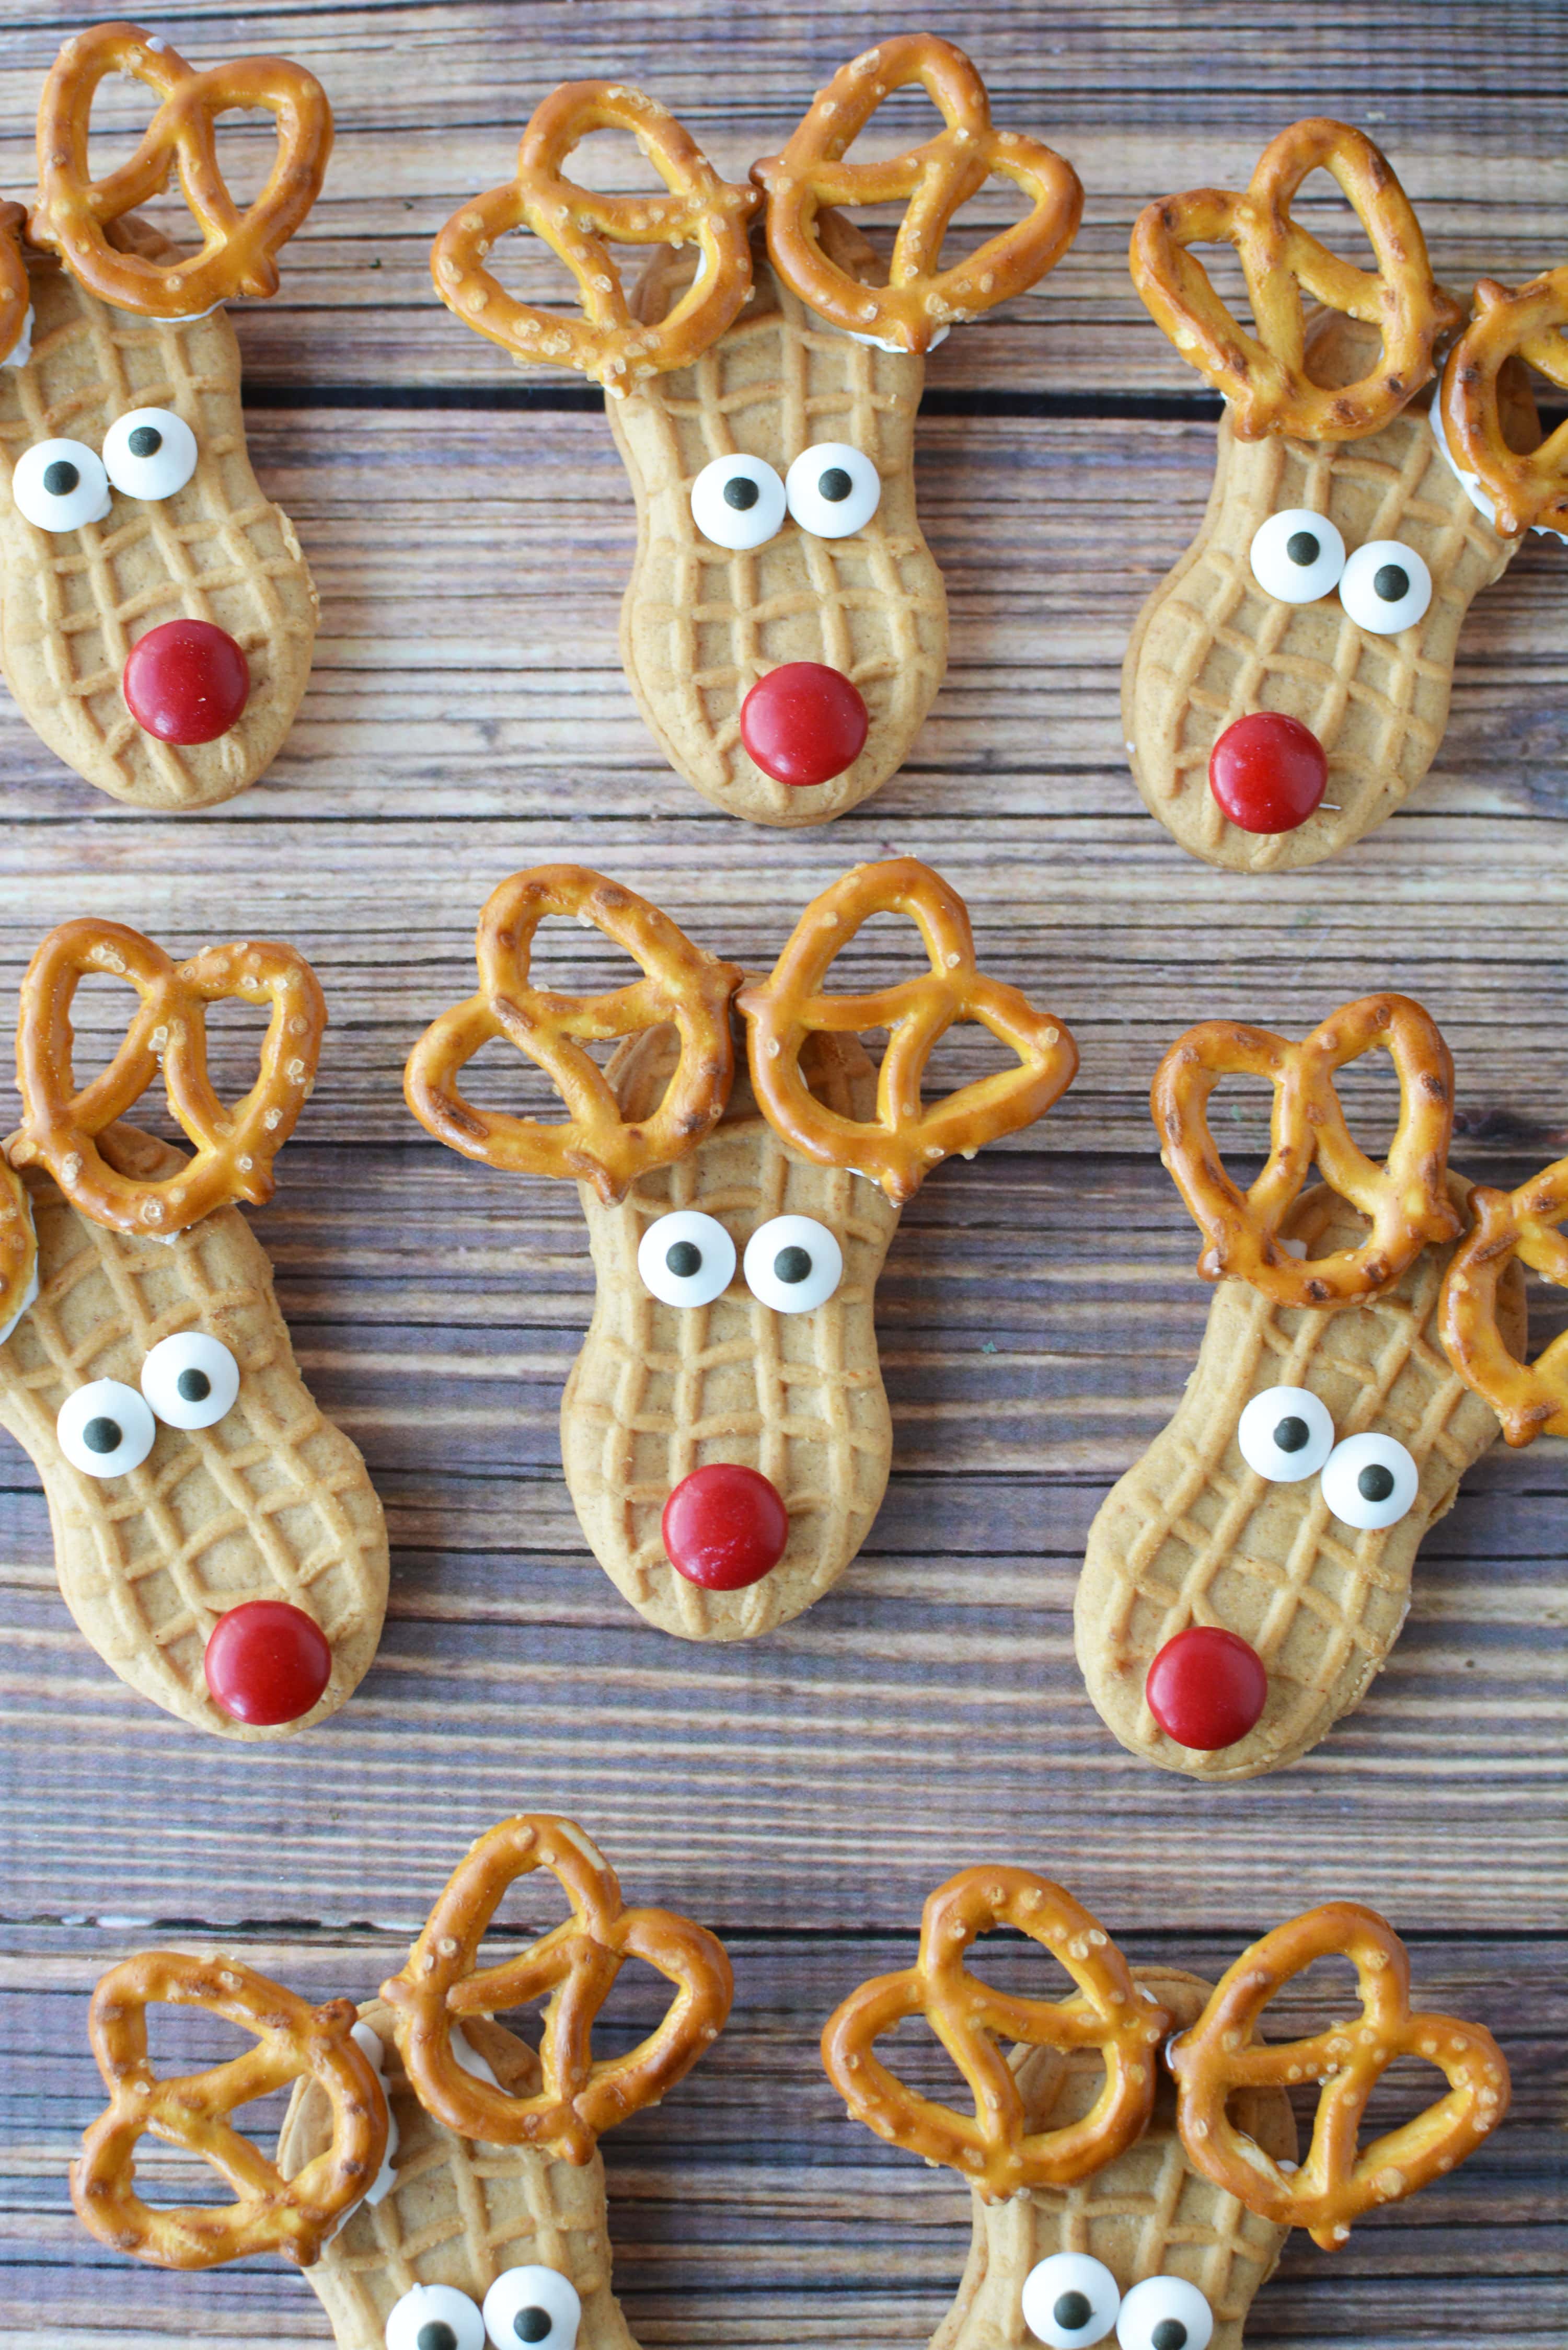 No Bake Nutter Butter Reindeer Cookies - So CUTE! - Thrifty NW Mom